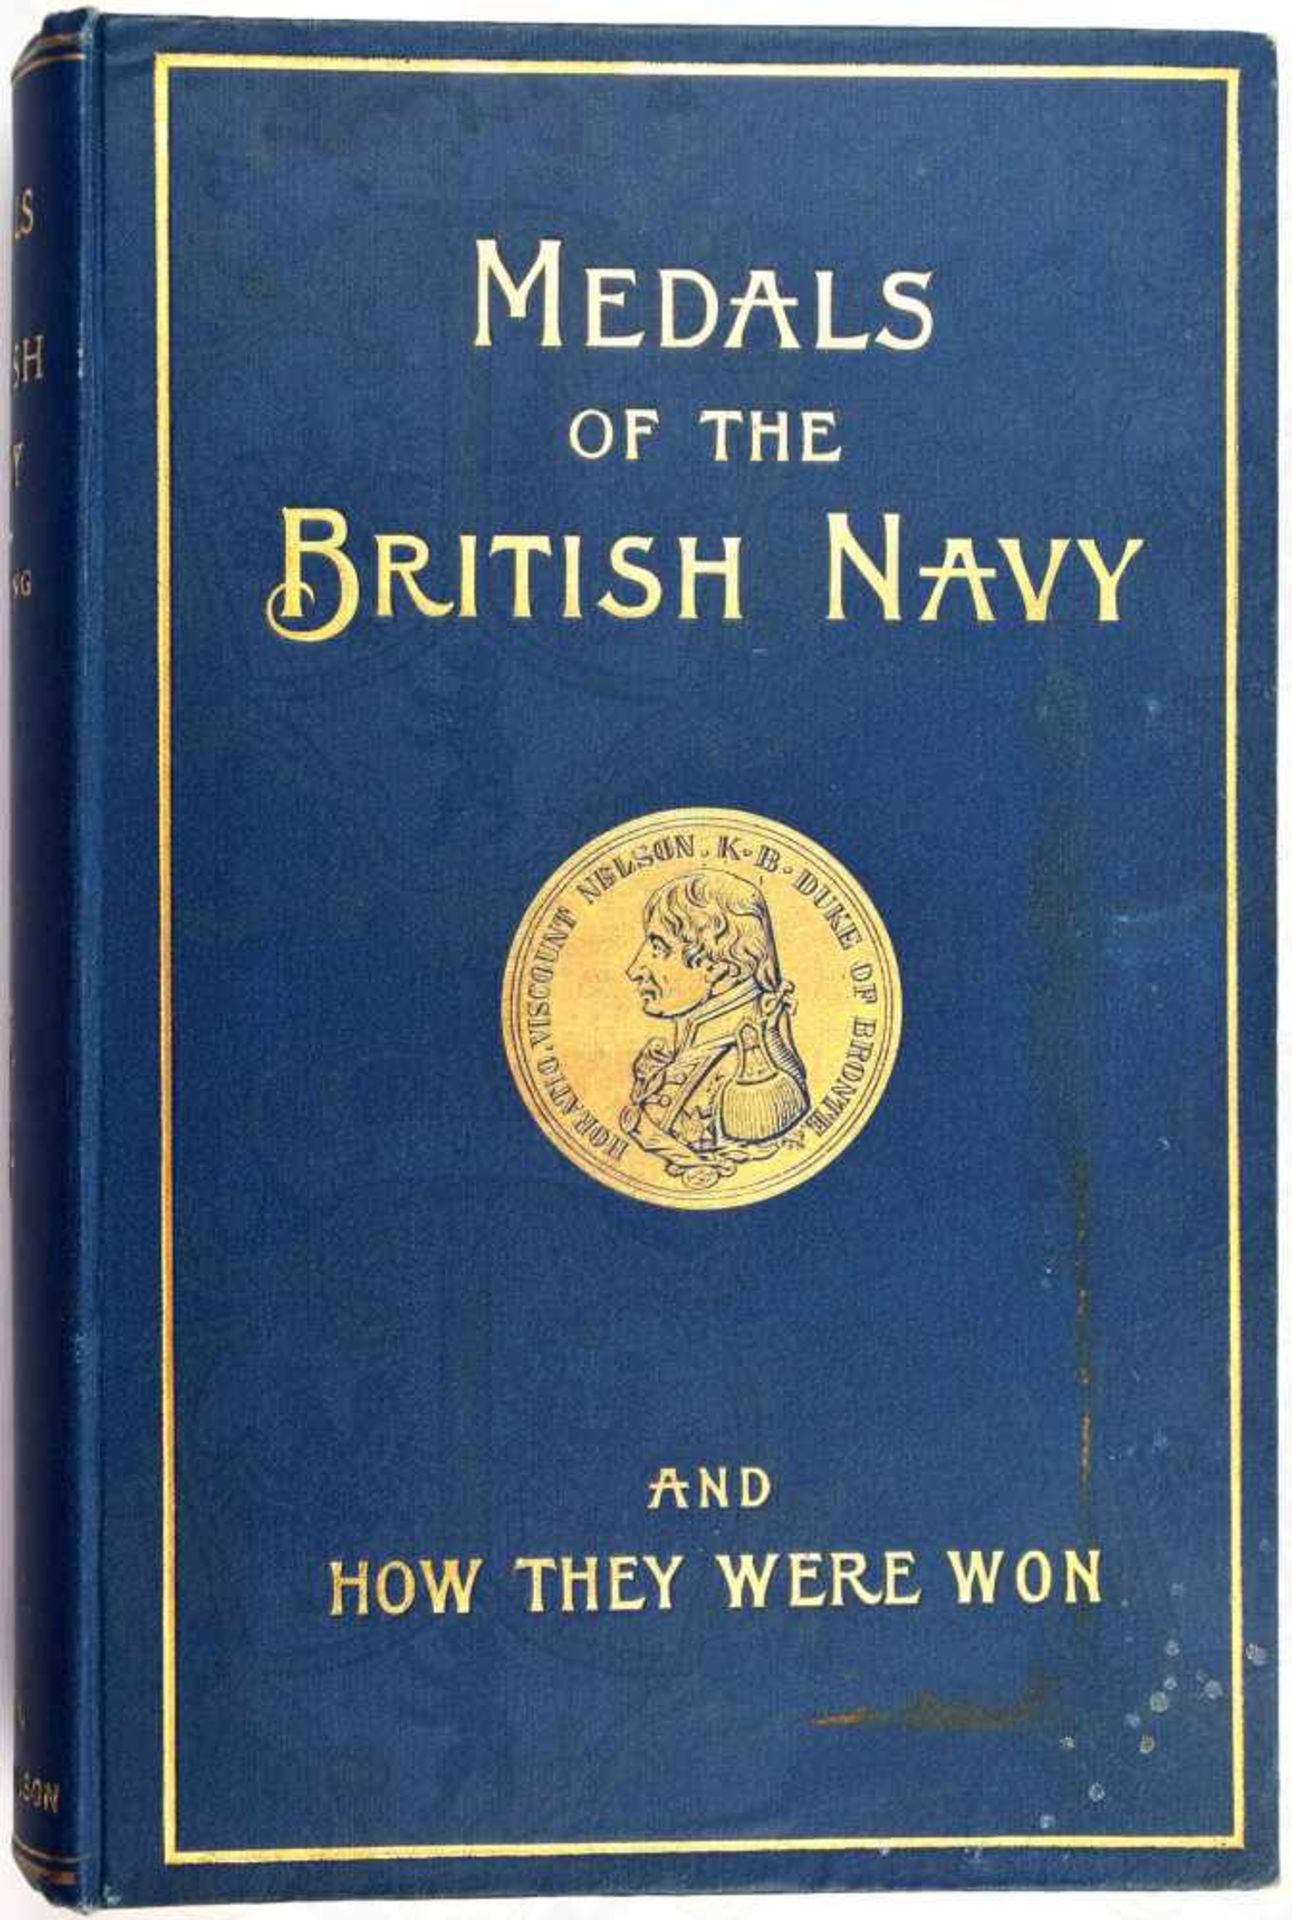 MEDALS OF THE BRITISH NAVY, and how they were won, W.H. Long, London 1895, zahlr. Farbtafeln, 450